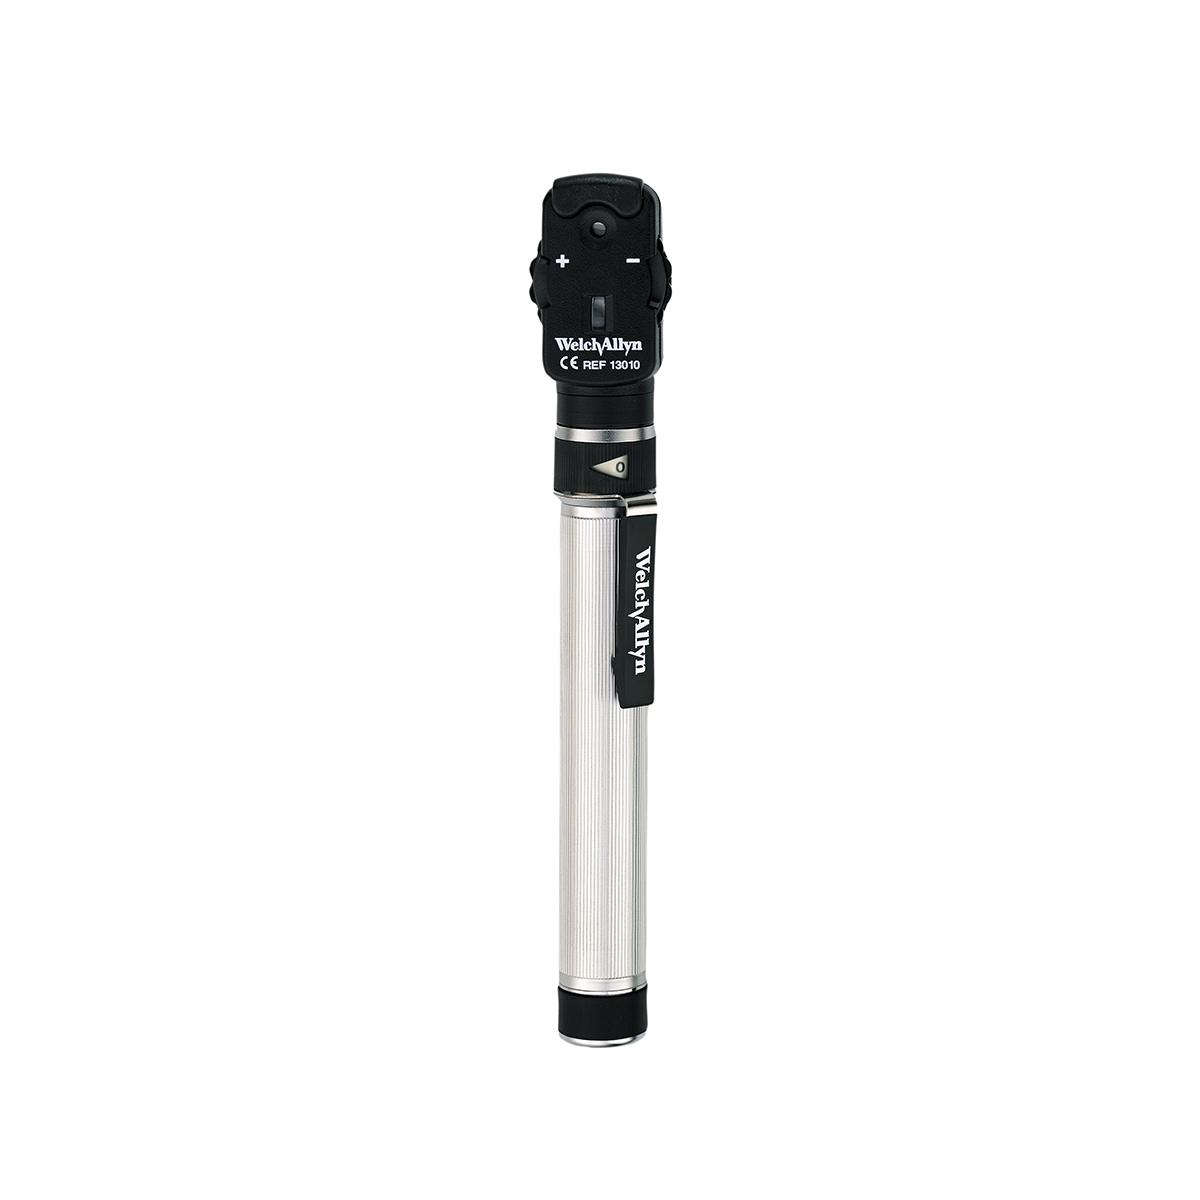 PocketScope Ophthalmoscope full view